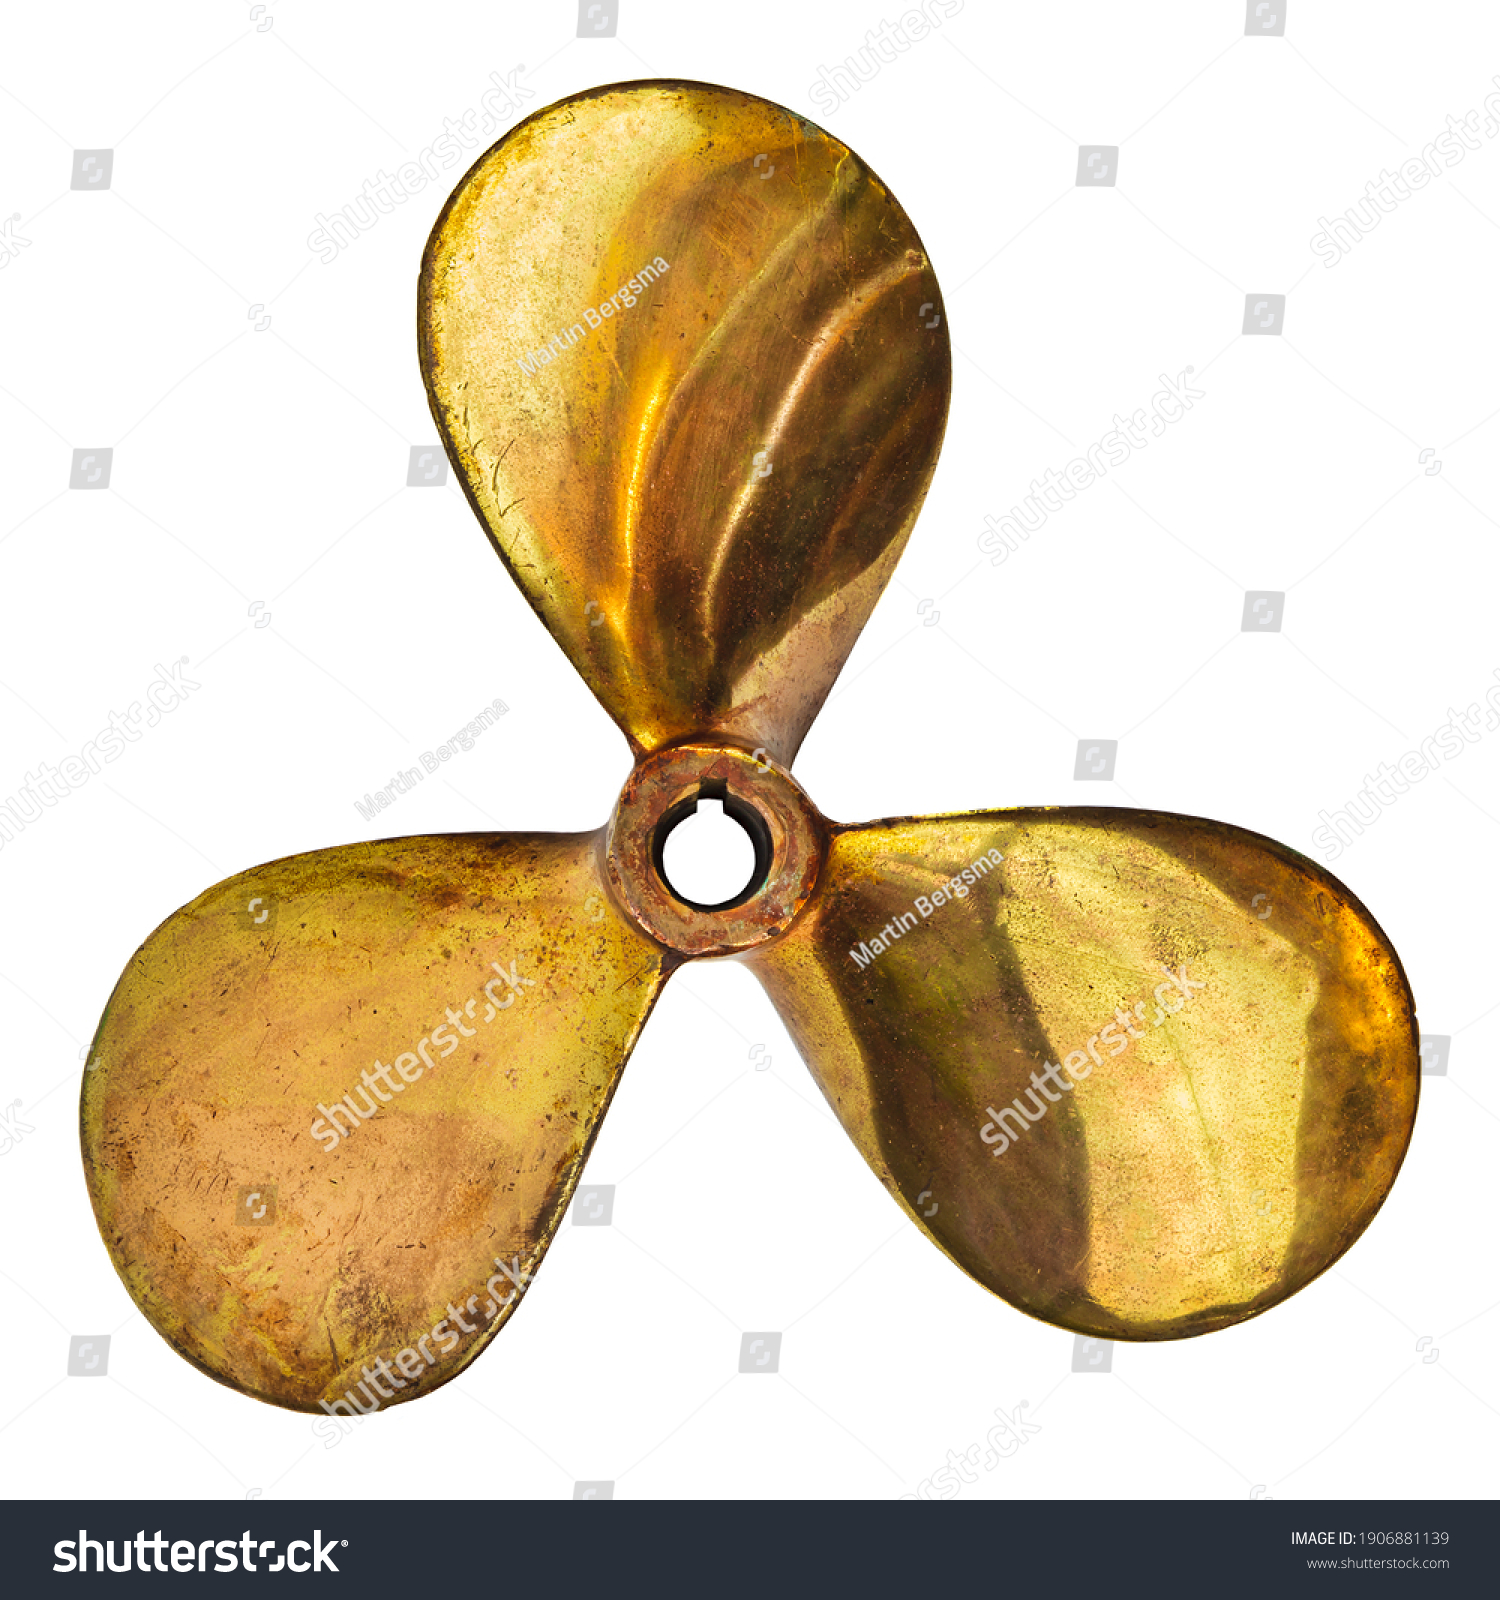 Vintage three bladed brass ship screw propeller isolated on a white background #1906881139